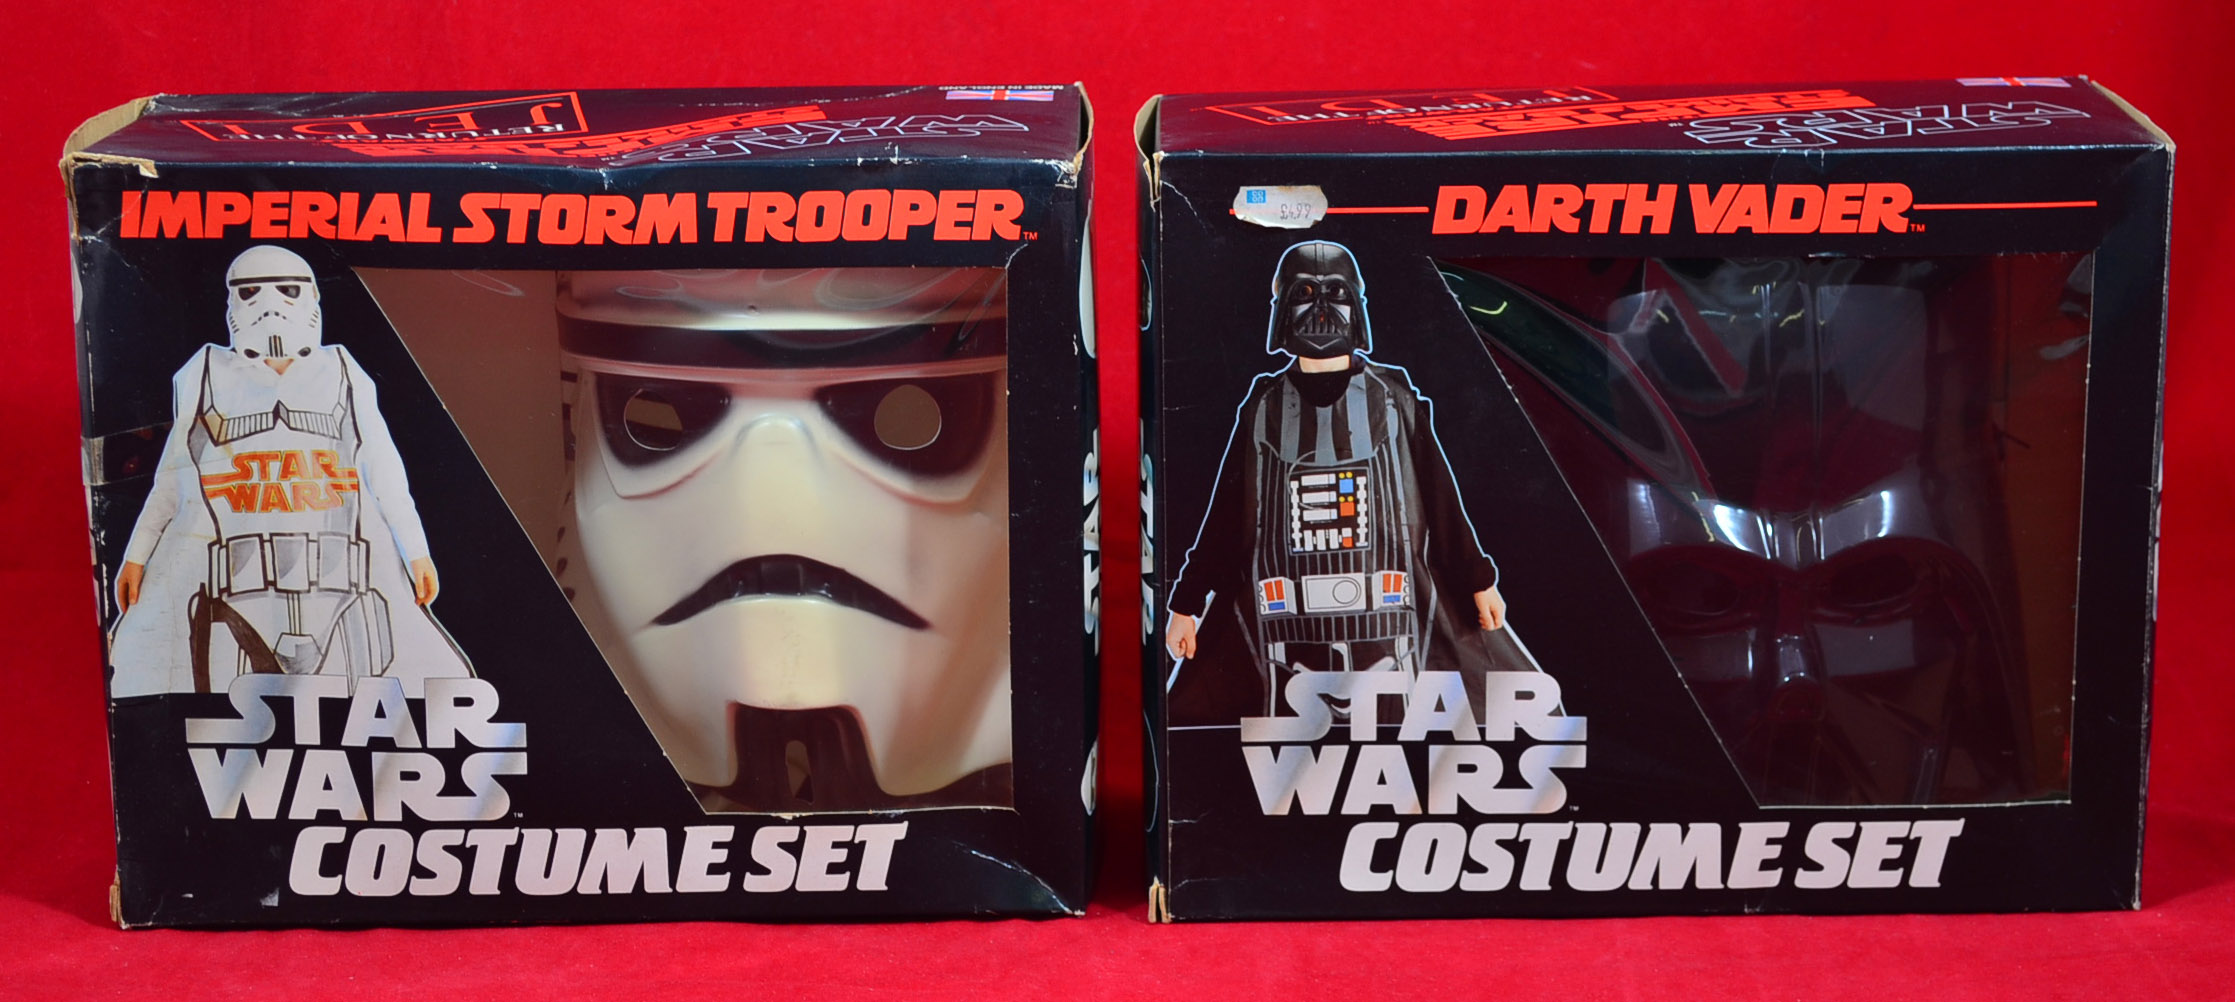 Two Acamas Toys Star Wars costume sets, 1983, made in England, both unworn: Imperial Stormtrooper (